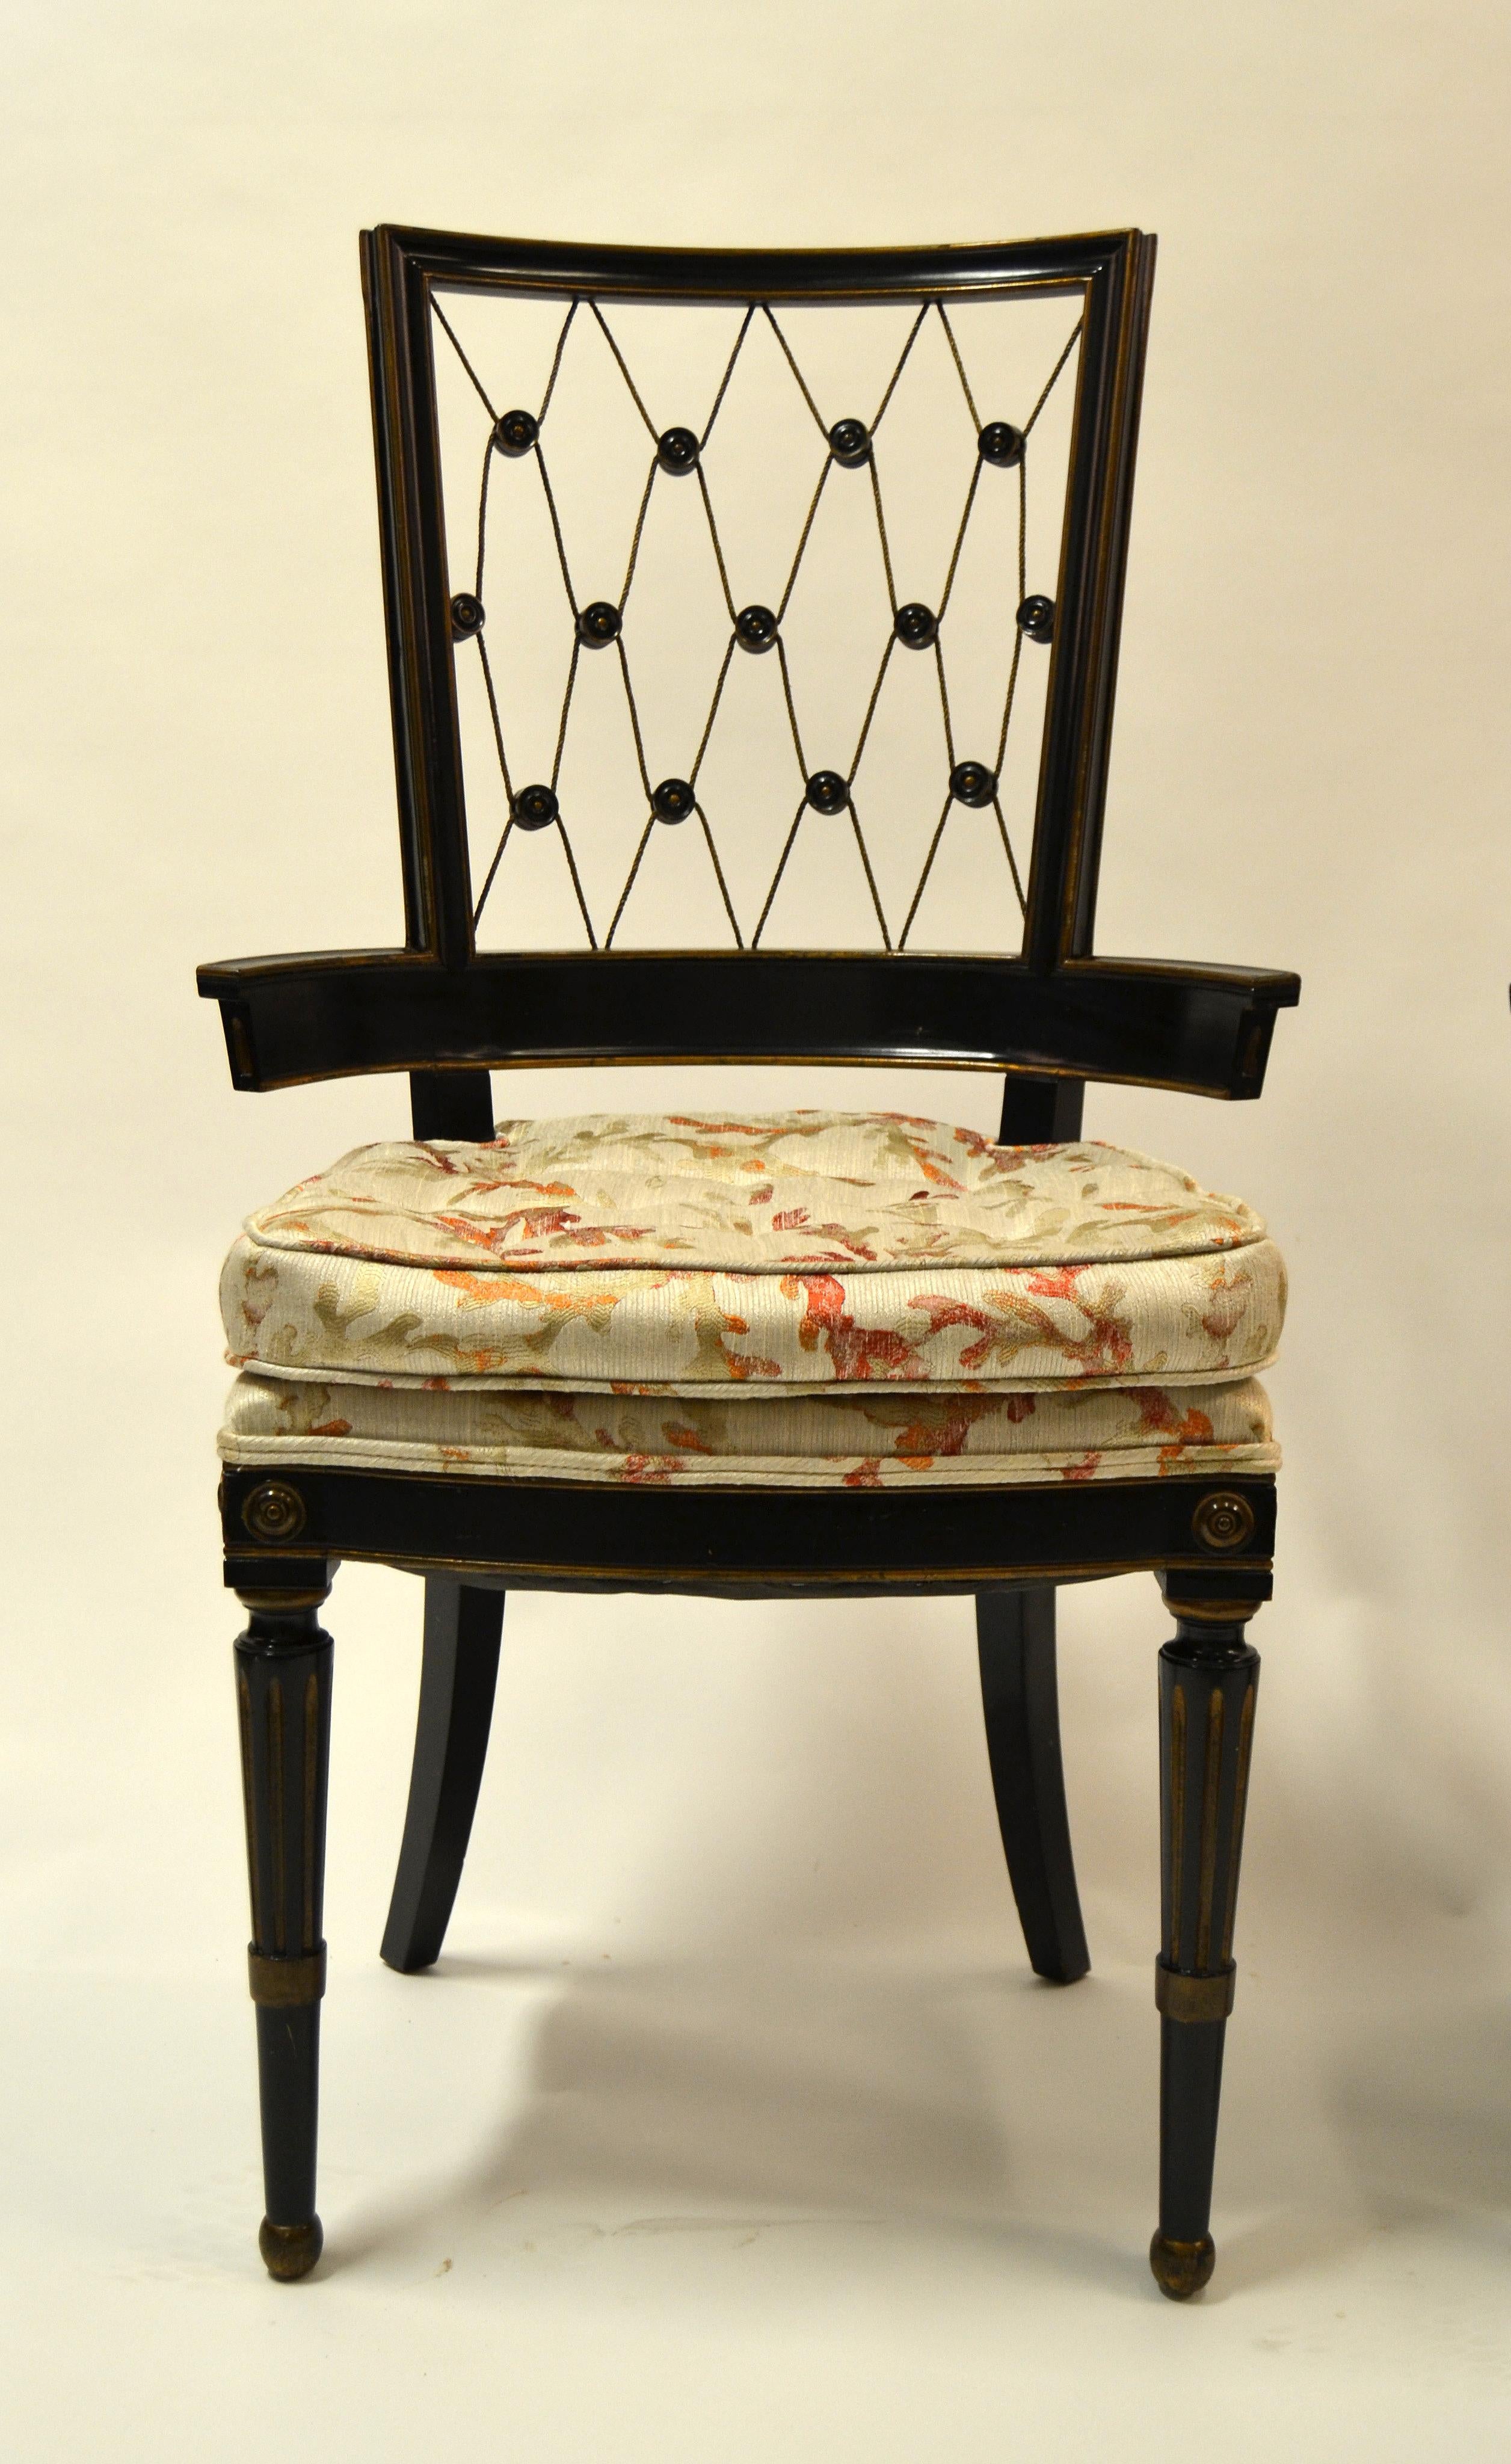 Ebonized 1940s American Side Chairs Intricate Diamond Pattern Back Black and Gold - Pair For Sale